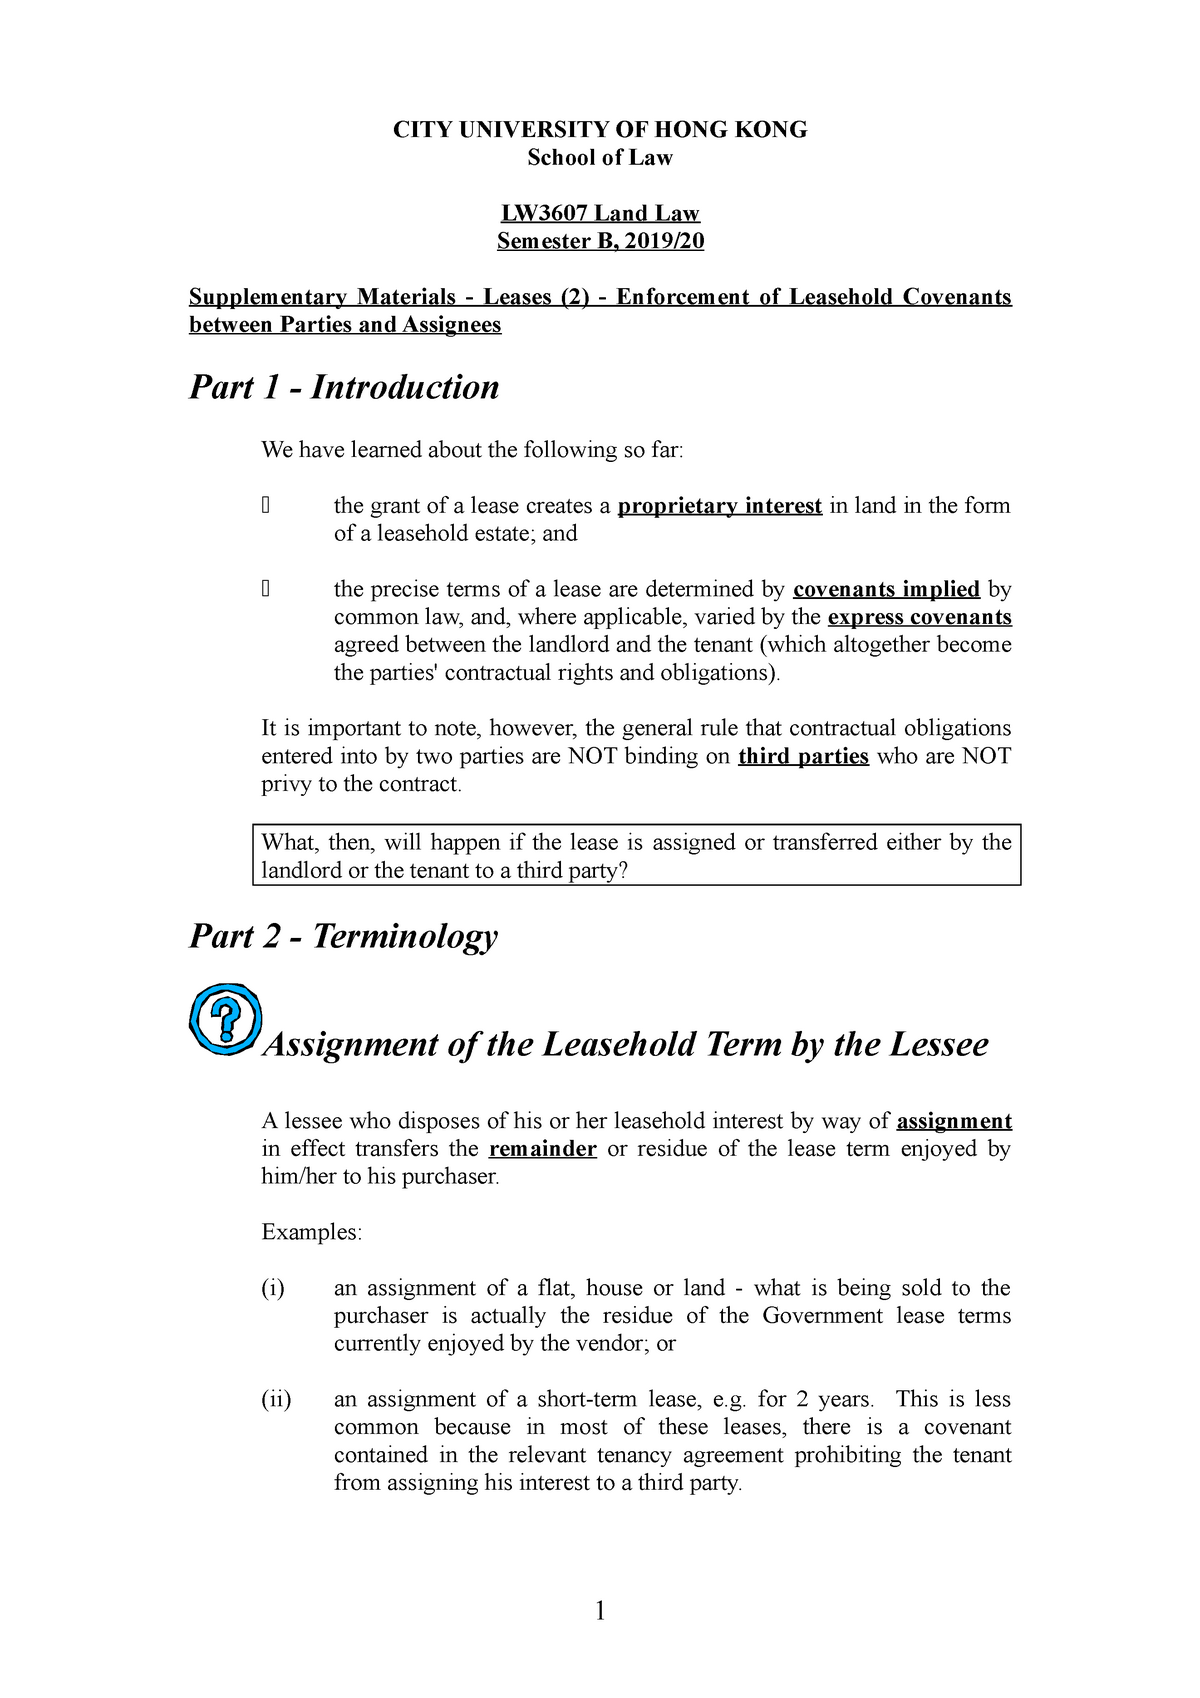 b3-leases-2-lecture-city-university-of-hong-kong-school-of-law